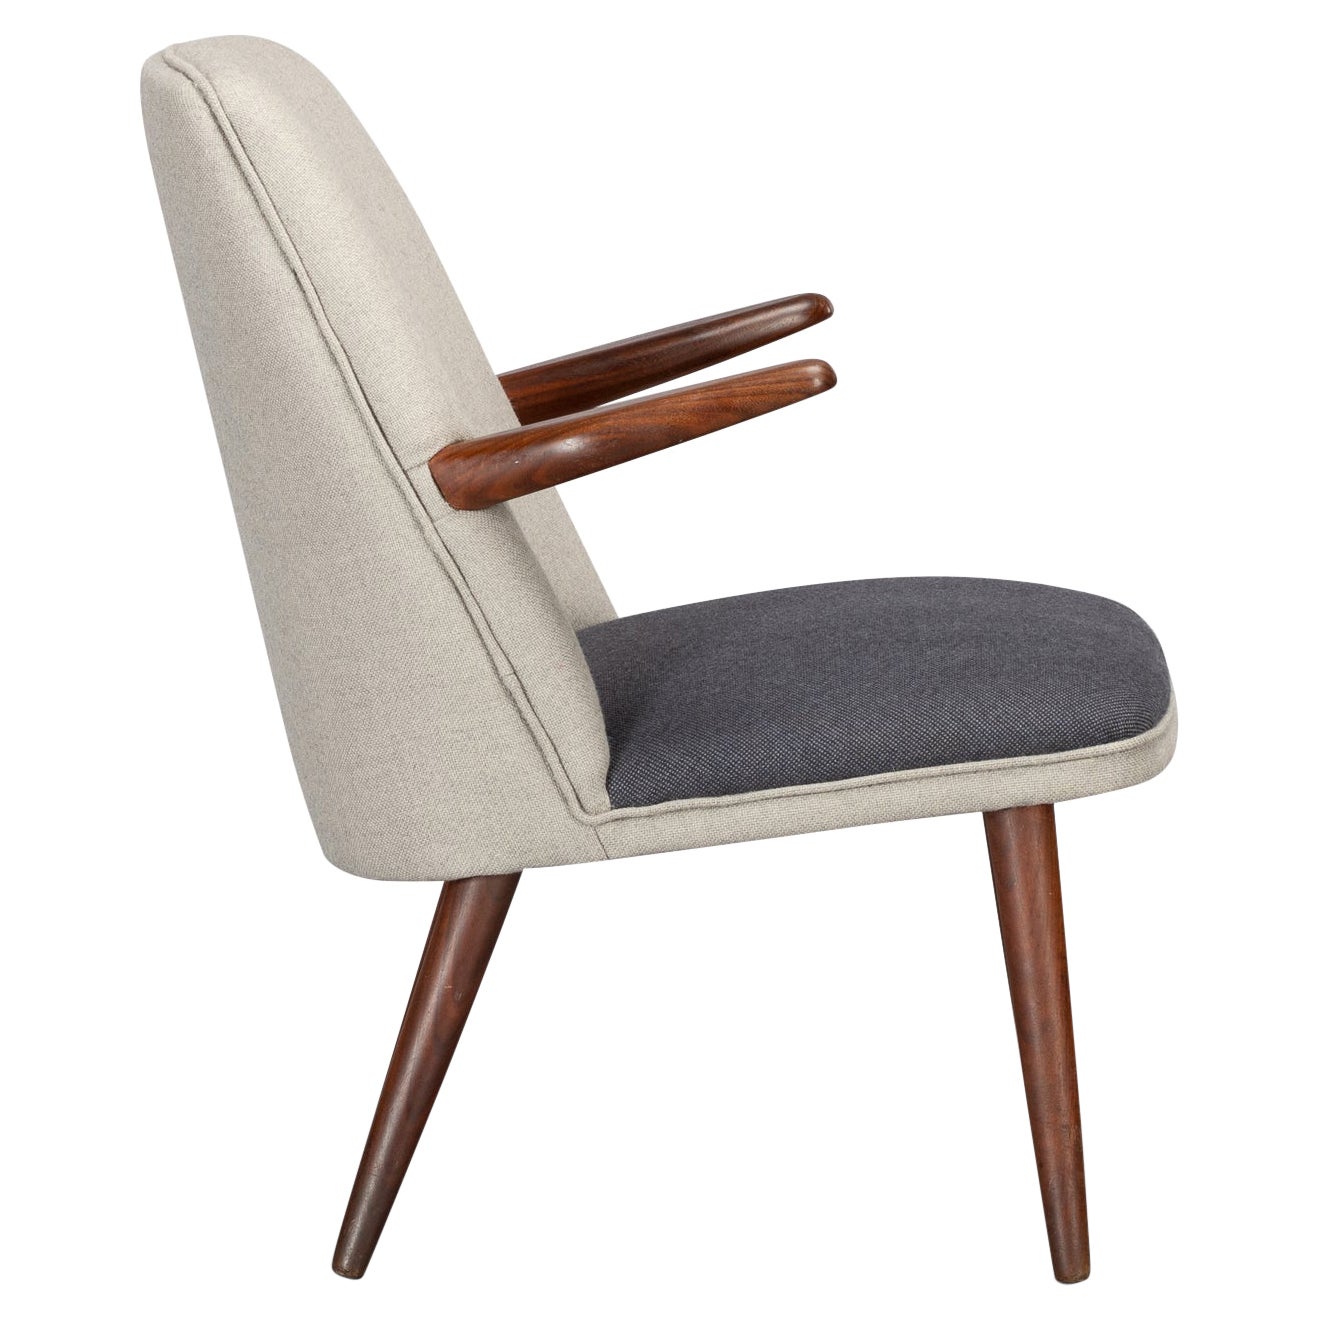 Danish Design Armchair Reupholstered In Twin Colour Pure Wool, 1960s